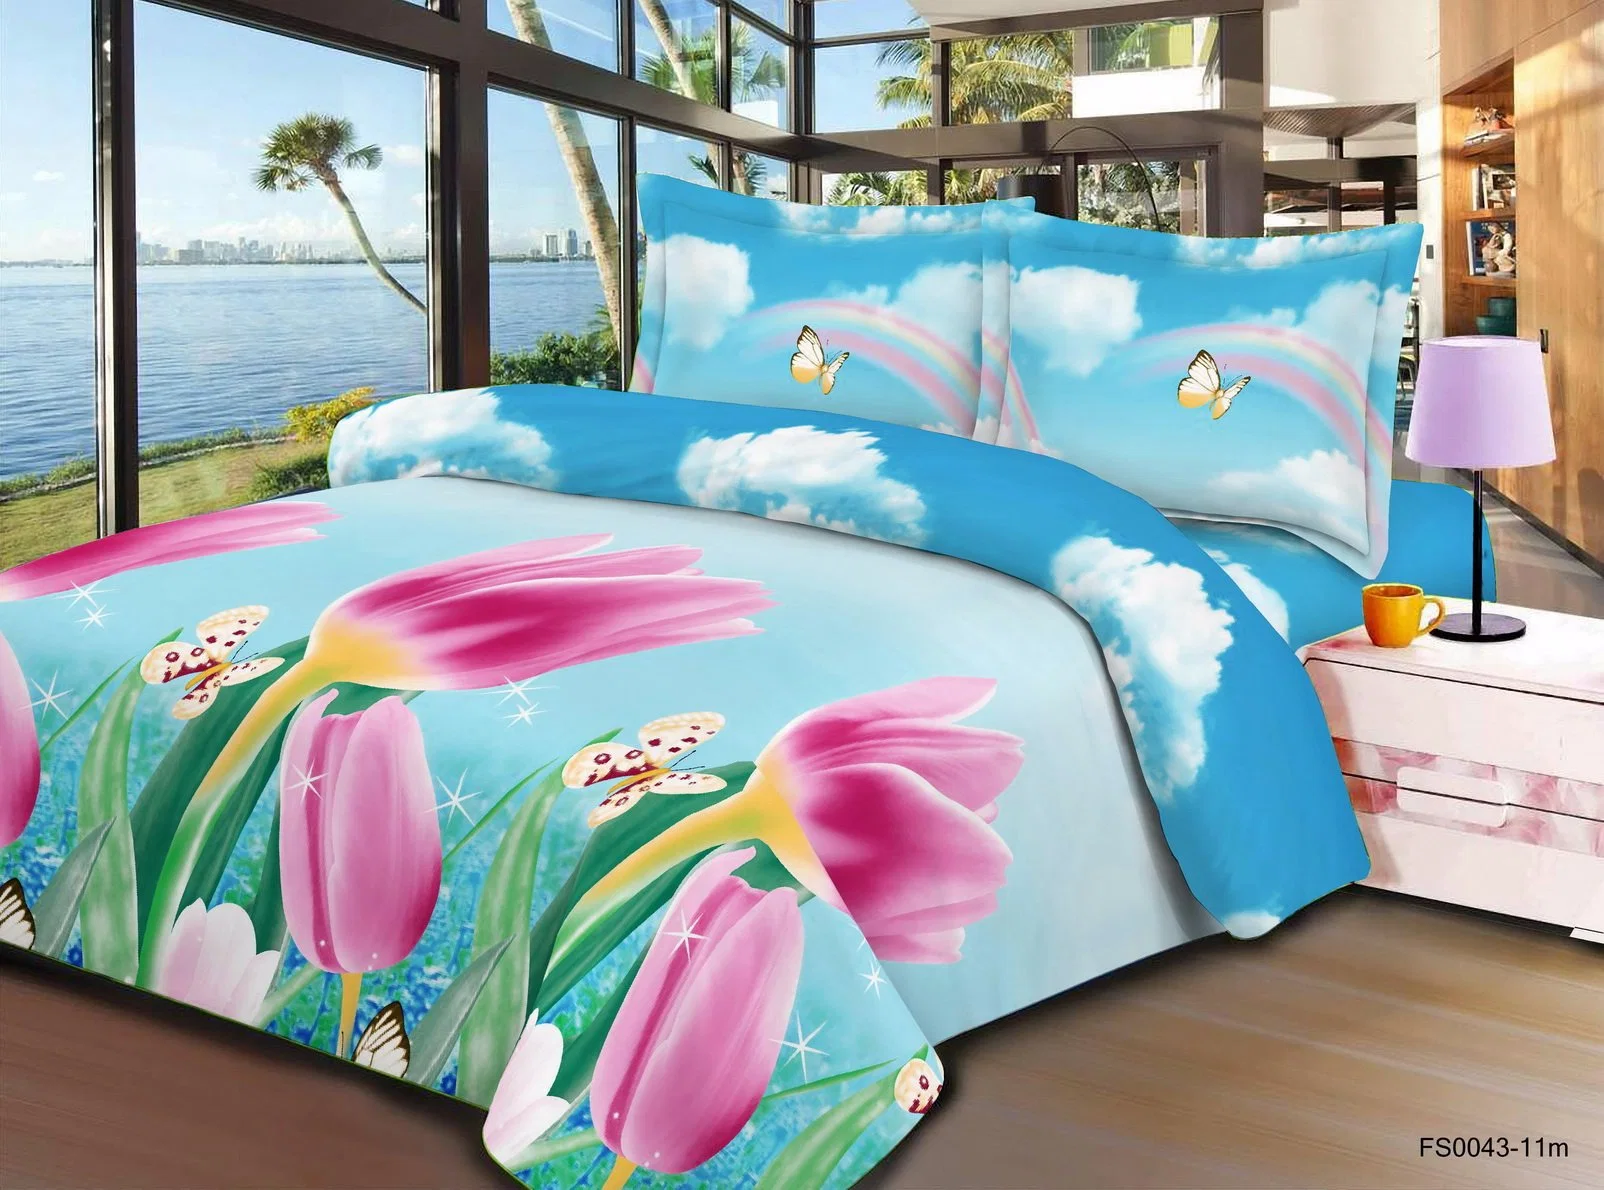 100% Polyester Printed Fabric for Making Bed Sheets Singapore Jakarta, Indonesia 80gsn Indonesian Bedding Fabric